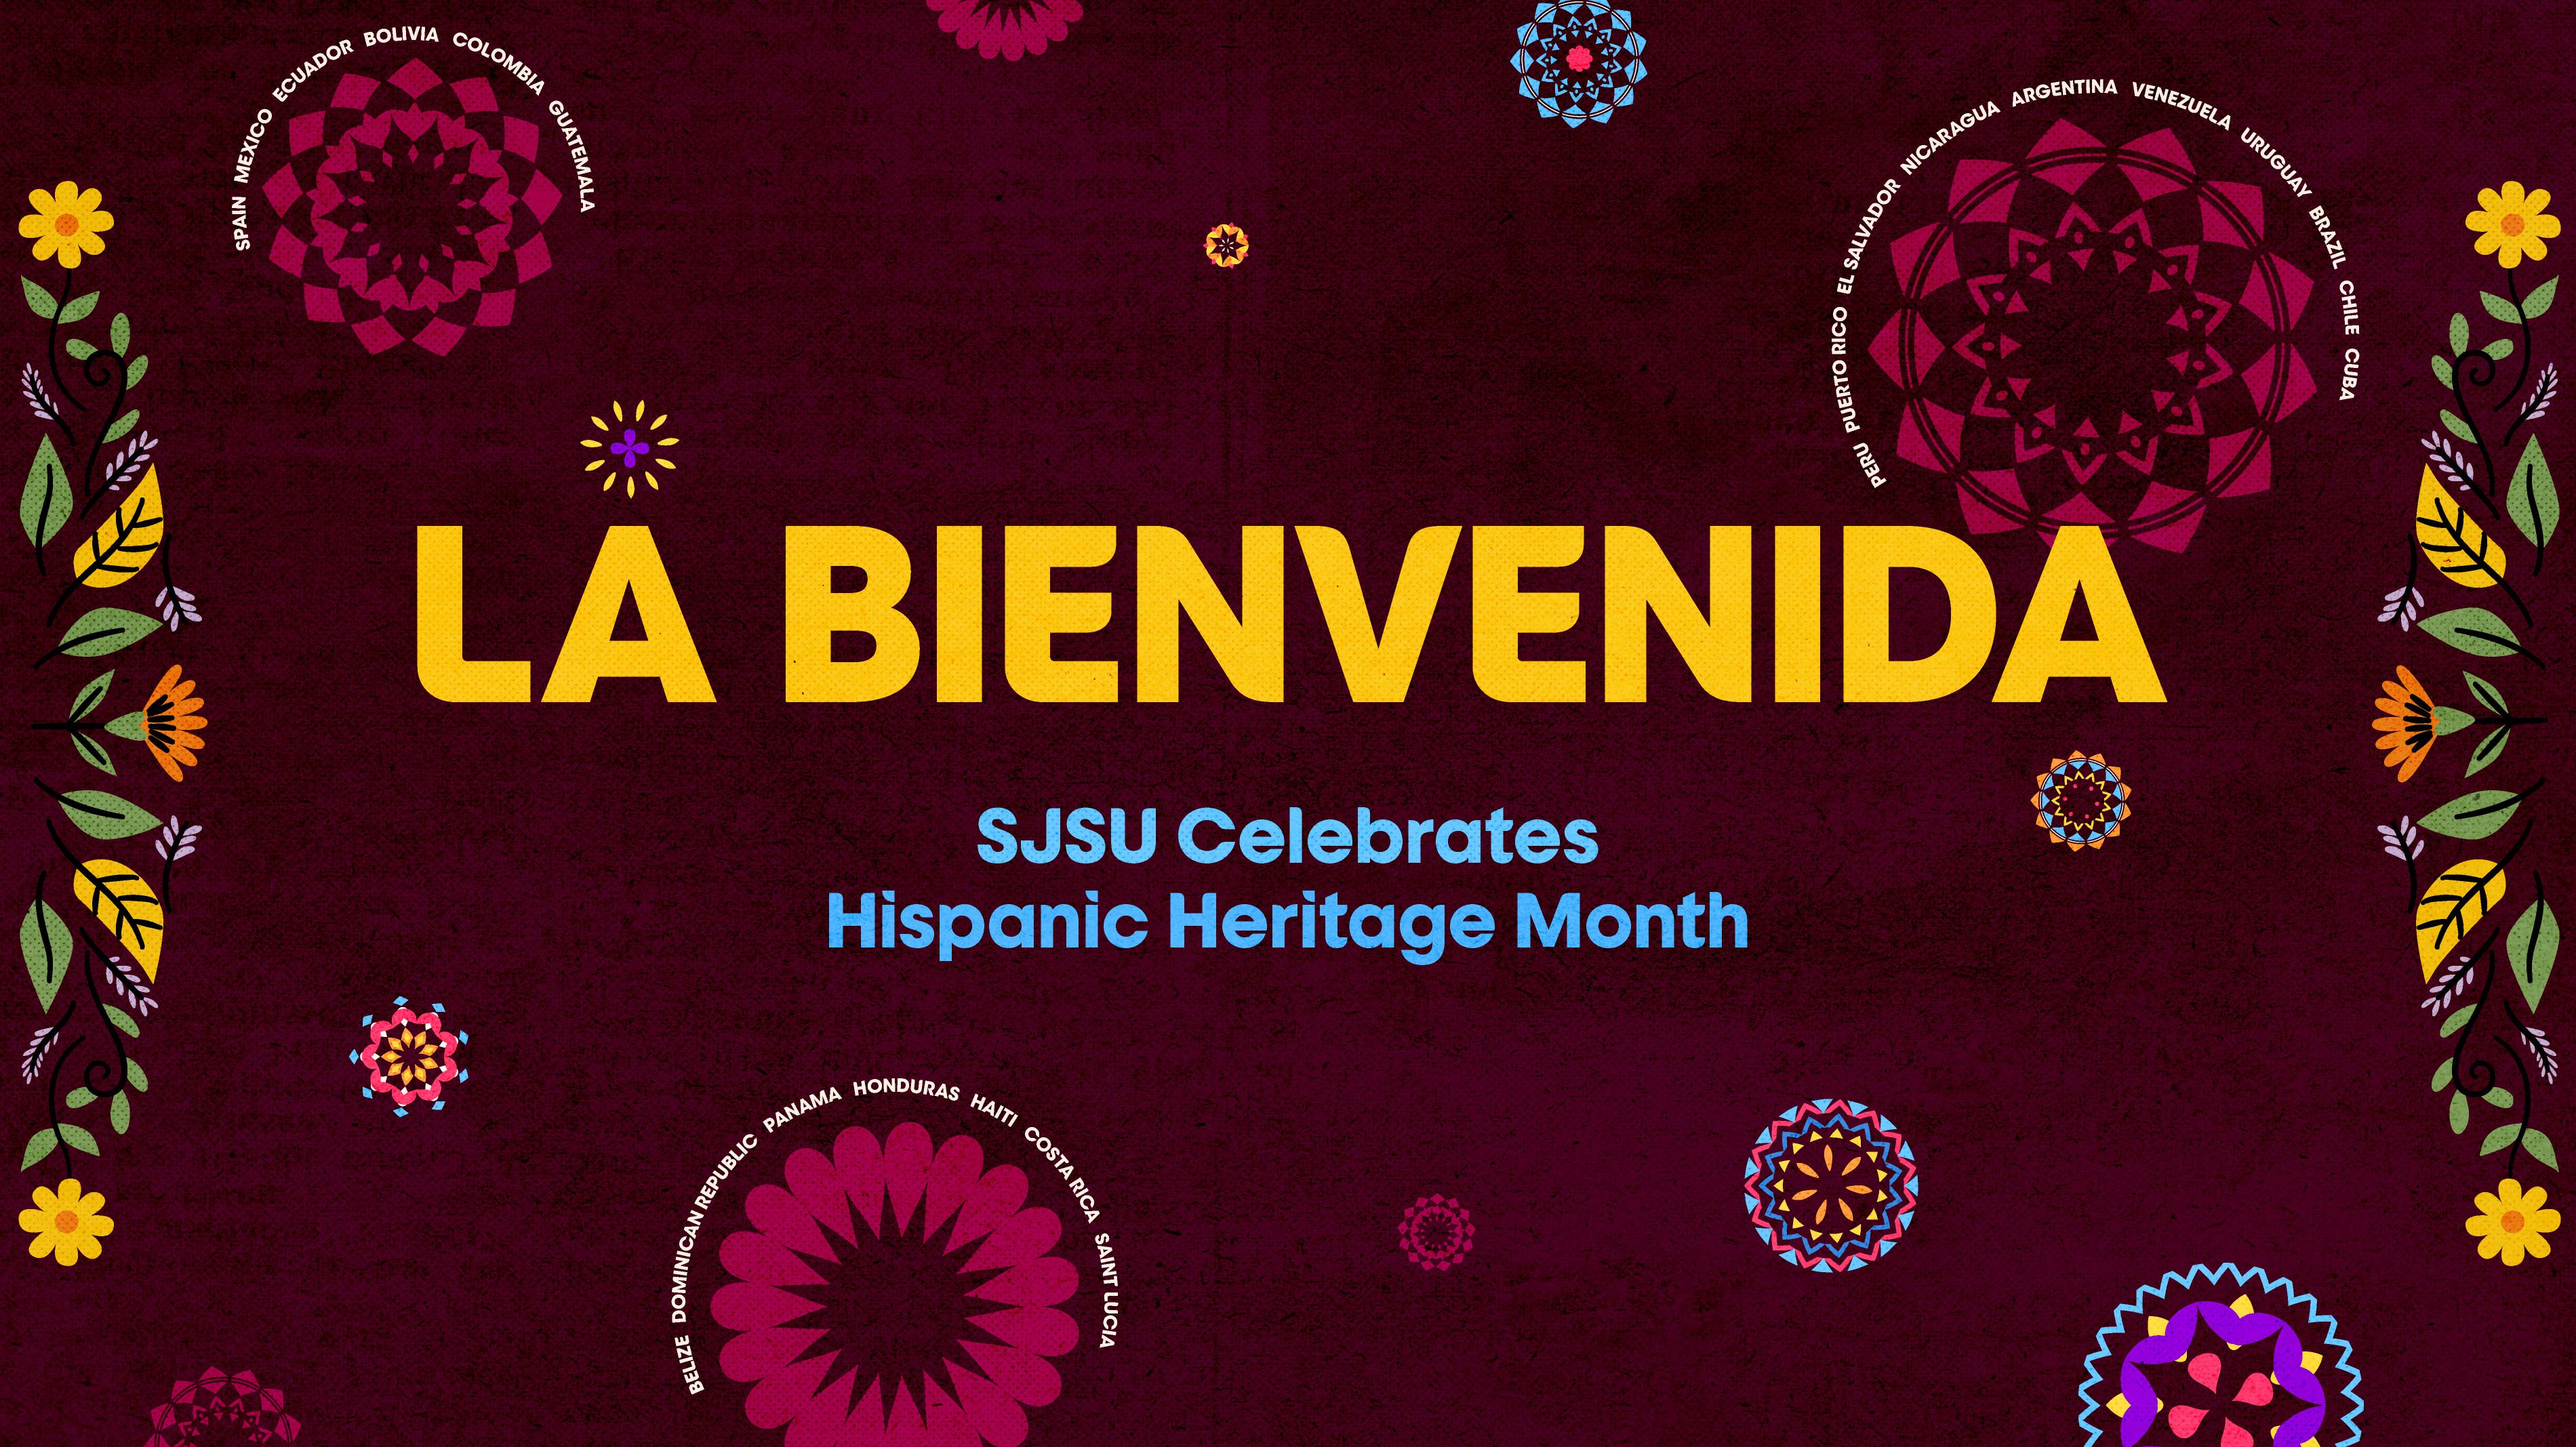 SJSU Celebrates Hispanic Heritage Month, La Bienvenida, over a textured maroon background with textile pattern flowers that are flanked by the names of different latin and spanish countries.